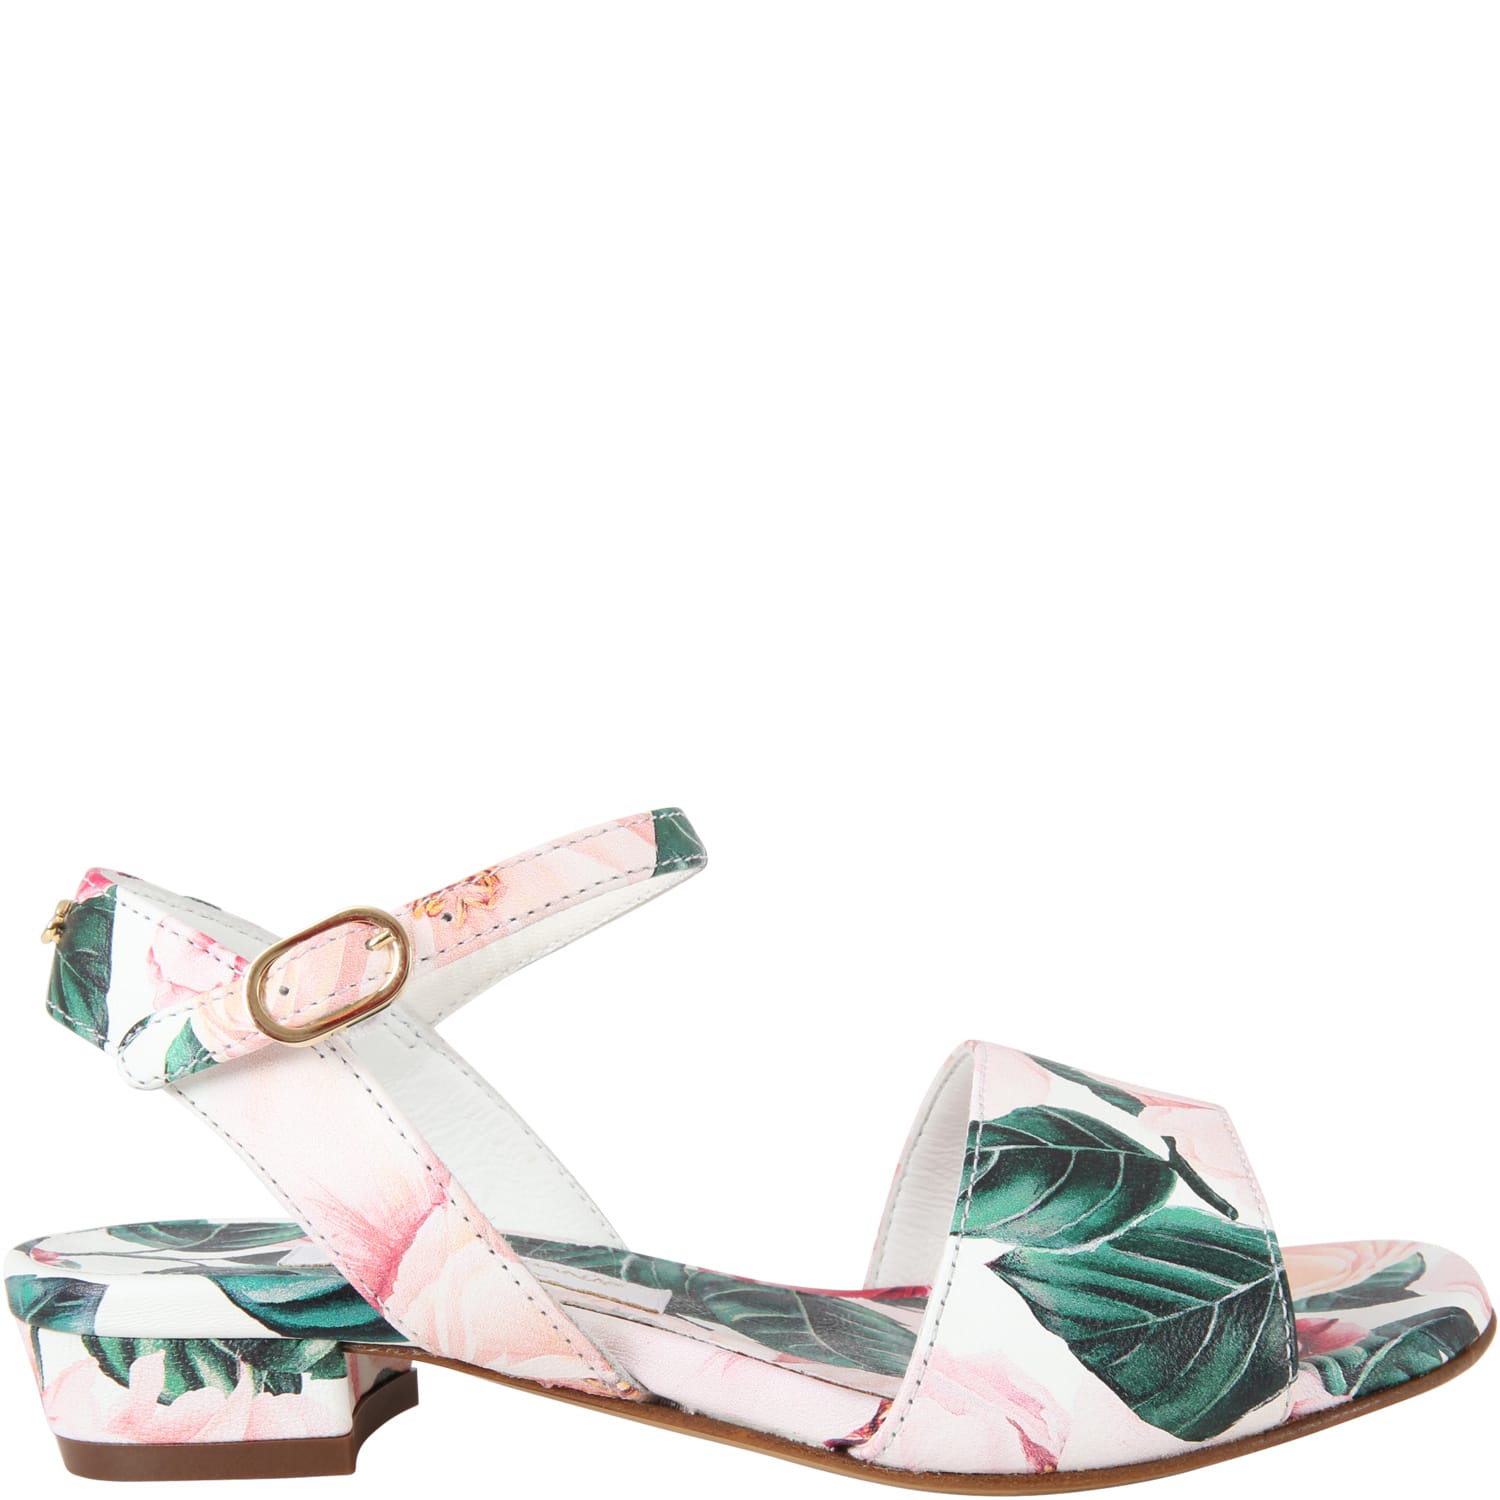 Buy Dolce & Gabbana White Sandals For Girl online, shop Dolce & Gabbana shoes with free shipping